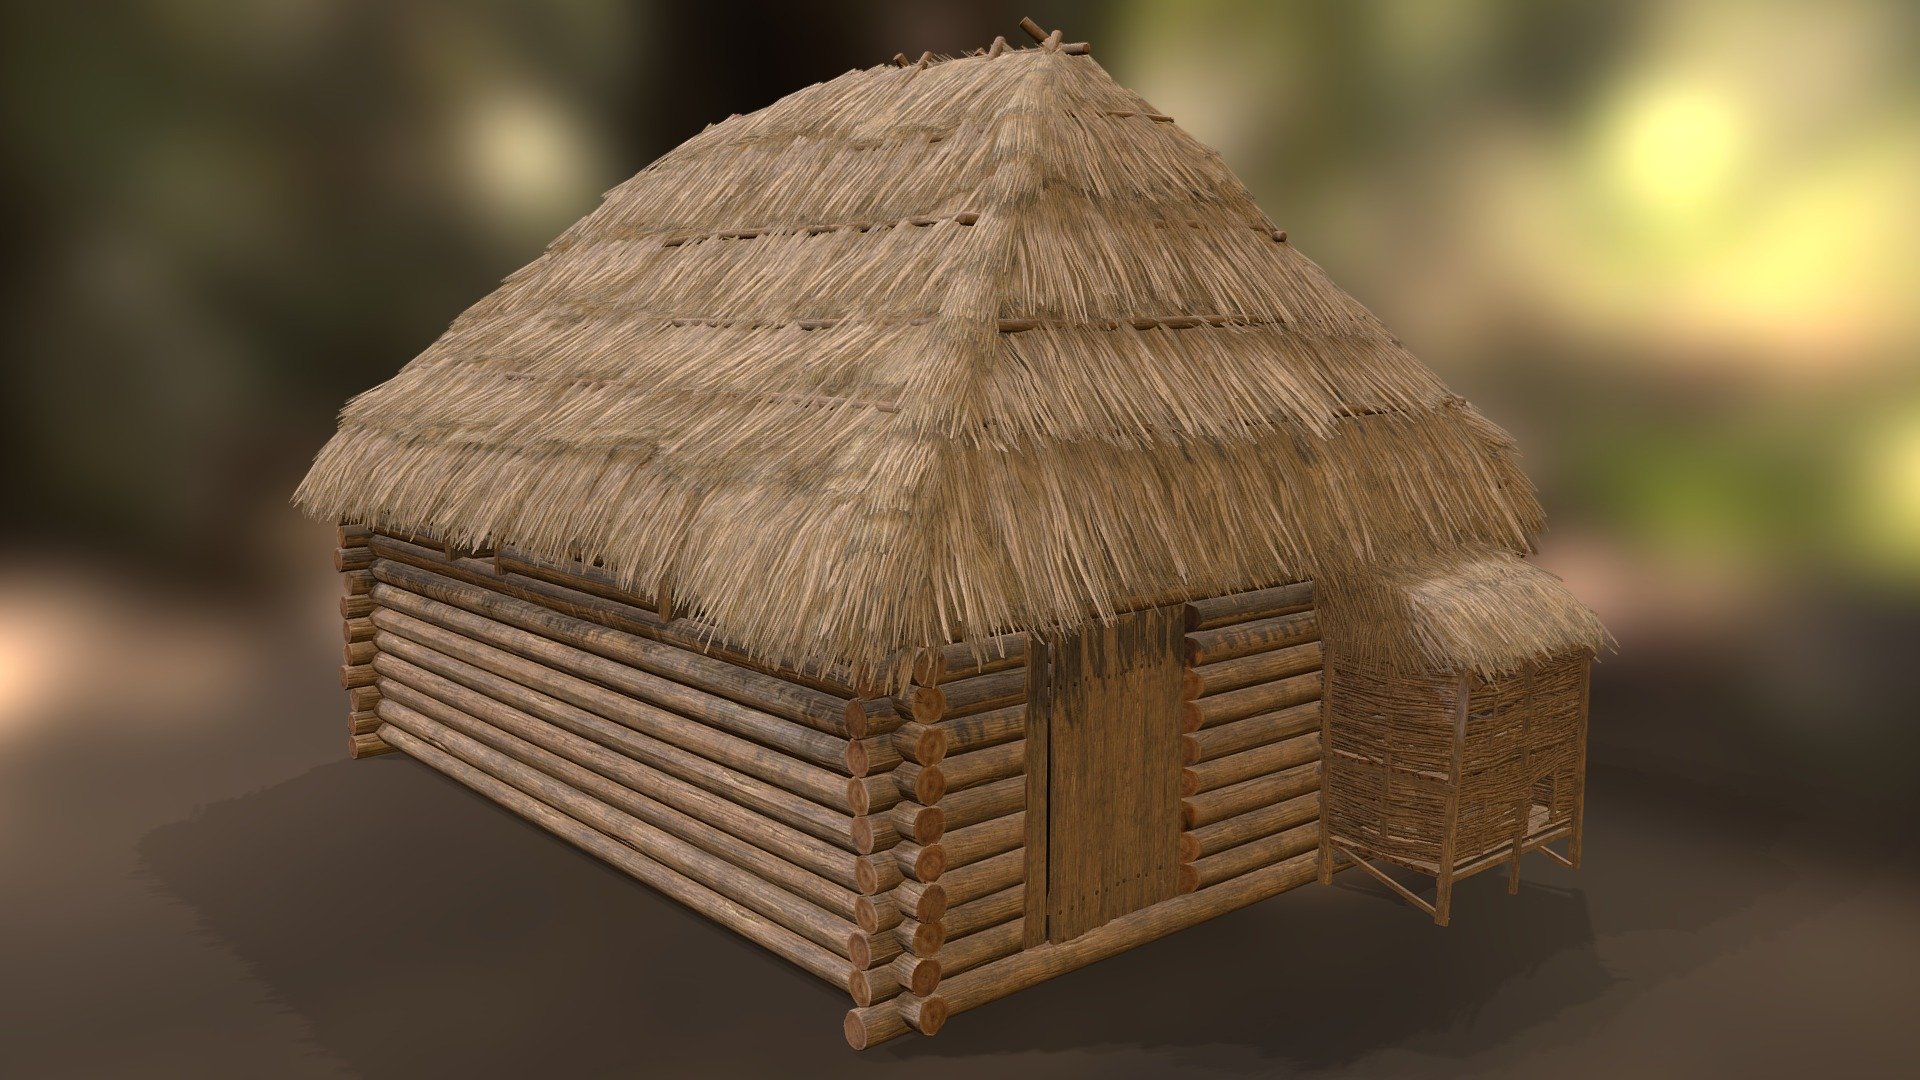 Wooden hut, with thatch roof.
All materials have seamless PBR textures. Materials contained: Wood, wood weave, thatch, wooden rings and thatch detail

Most of the base textures are in 2048x2048

Normal textures are in OpenGl format.

Model comes with a zip file containing a wood detail normal texture and a special RGB textures combining multiple grayscale textures into one.

If you have interest in textures alone, or have a request for similiar creations, send me an email at danylo.tzupa@gmail.com - Wooden Thatch Hut, with seamless materials - Buy Royalty Free 3D model by Danylo Tyupa (@danzl0) 3d model